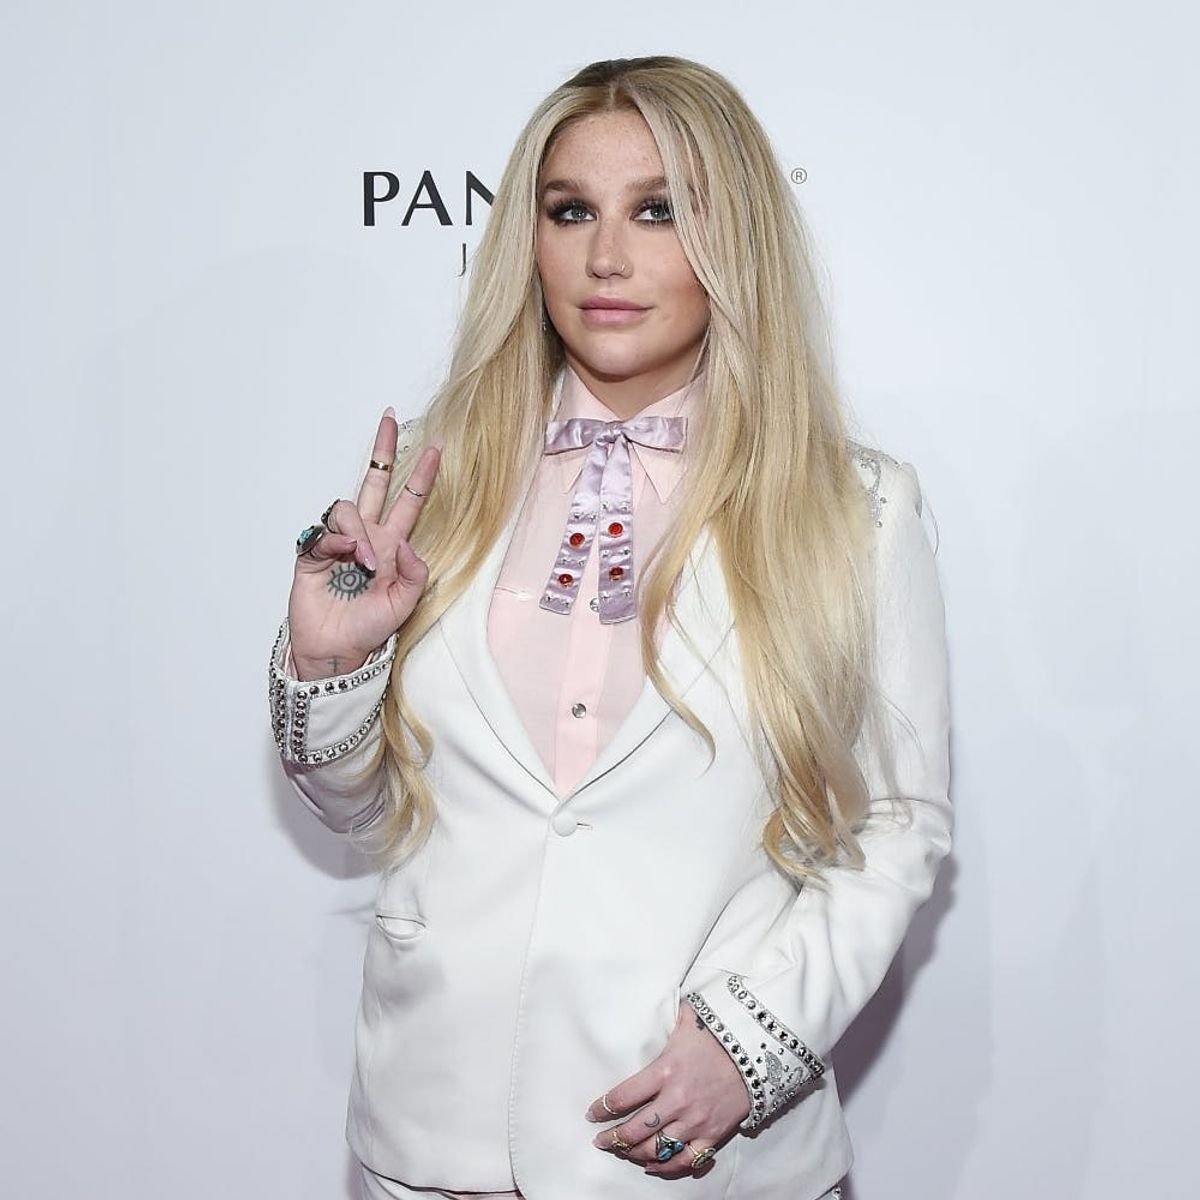 Sony Just Gave Kesha an Unexpected Victory by Dropping Dr. Luke from the Label